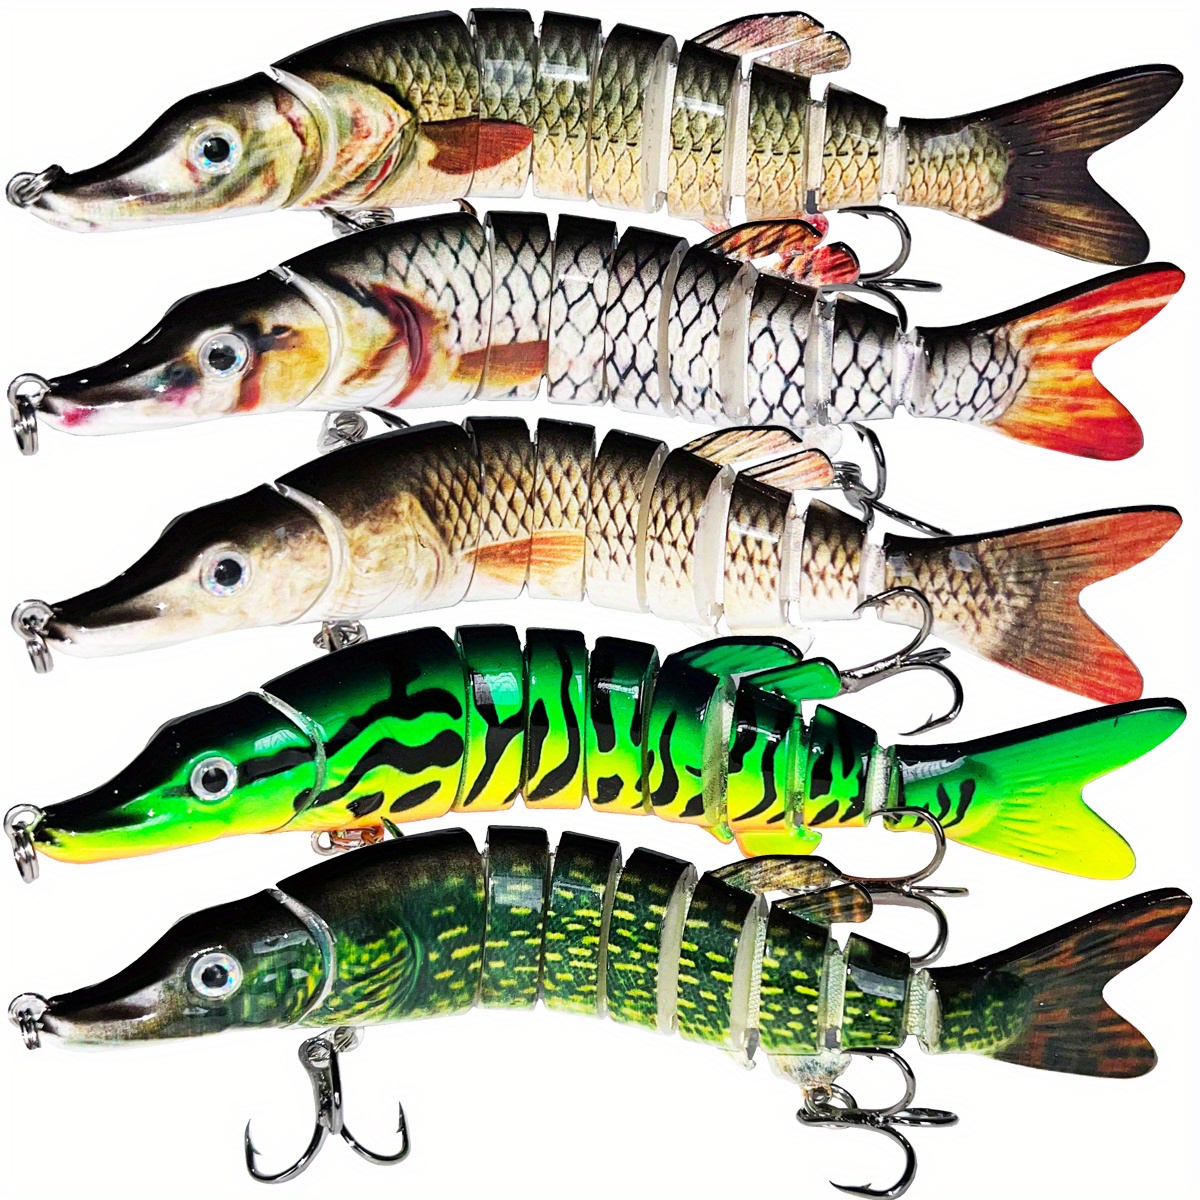  Duck Fishing Lures For Bass, Multi Jointed Swimbaits,  Lifelike Duck Swimmer For Trout Perch Pike Crappie Walleye Fishing